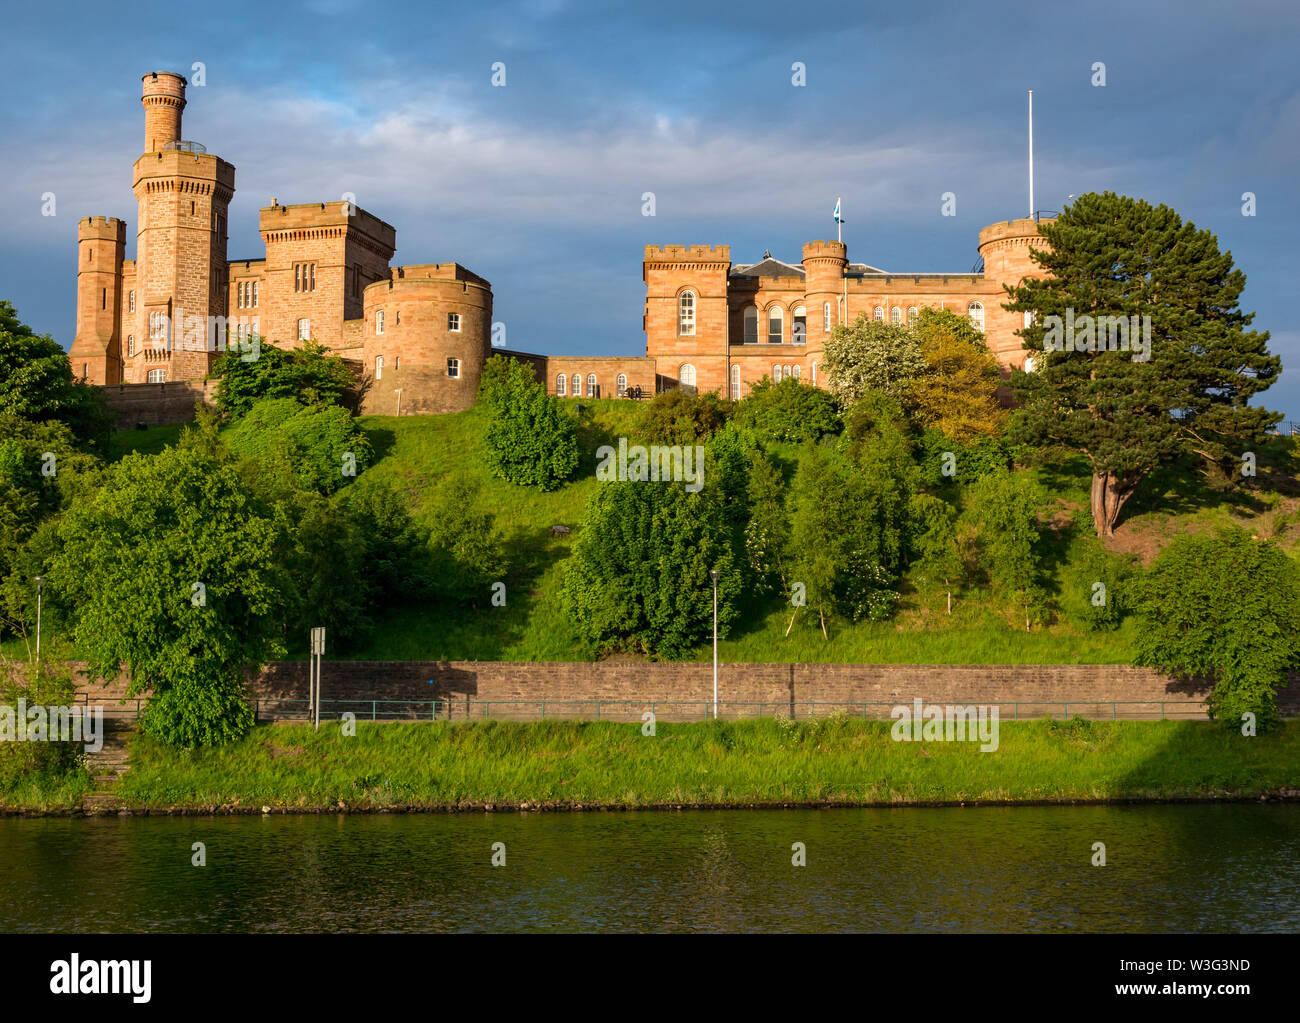 View across River Ness to sunlit  Inverness Castle on hilltop, Inverness, Scotland, UK Stock Photo